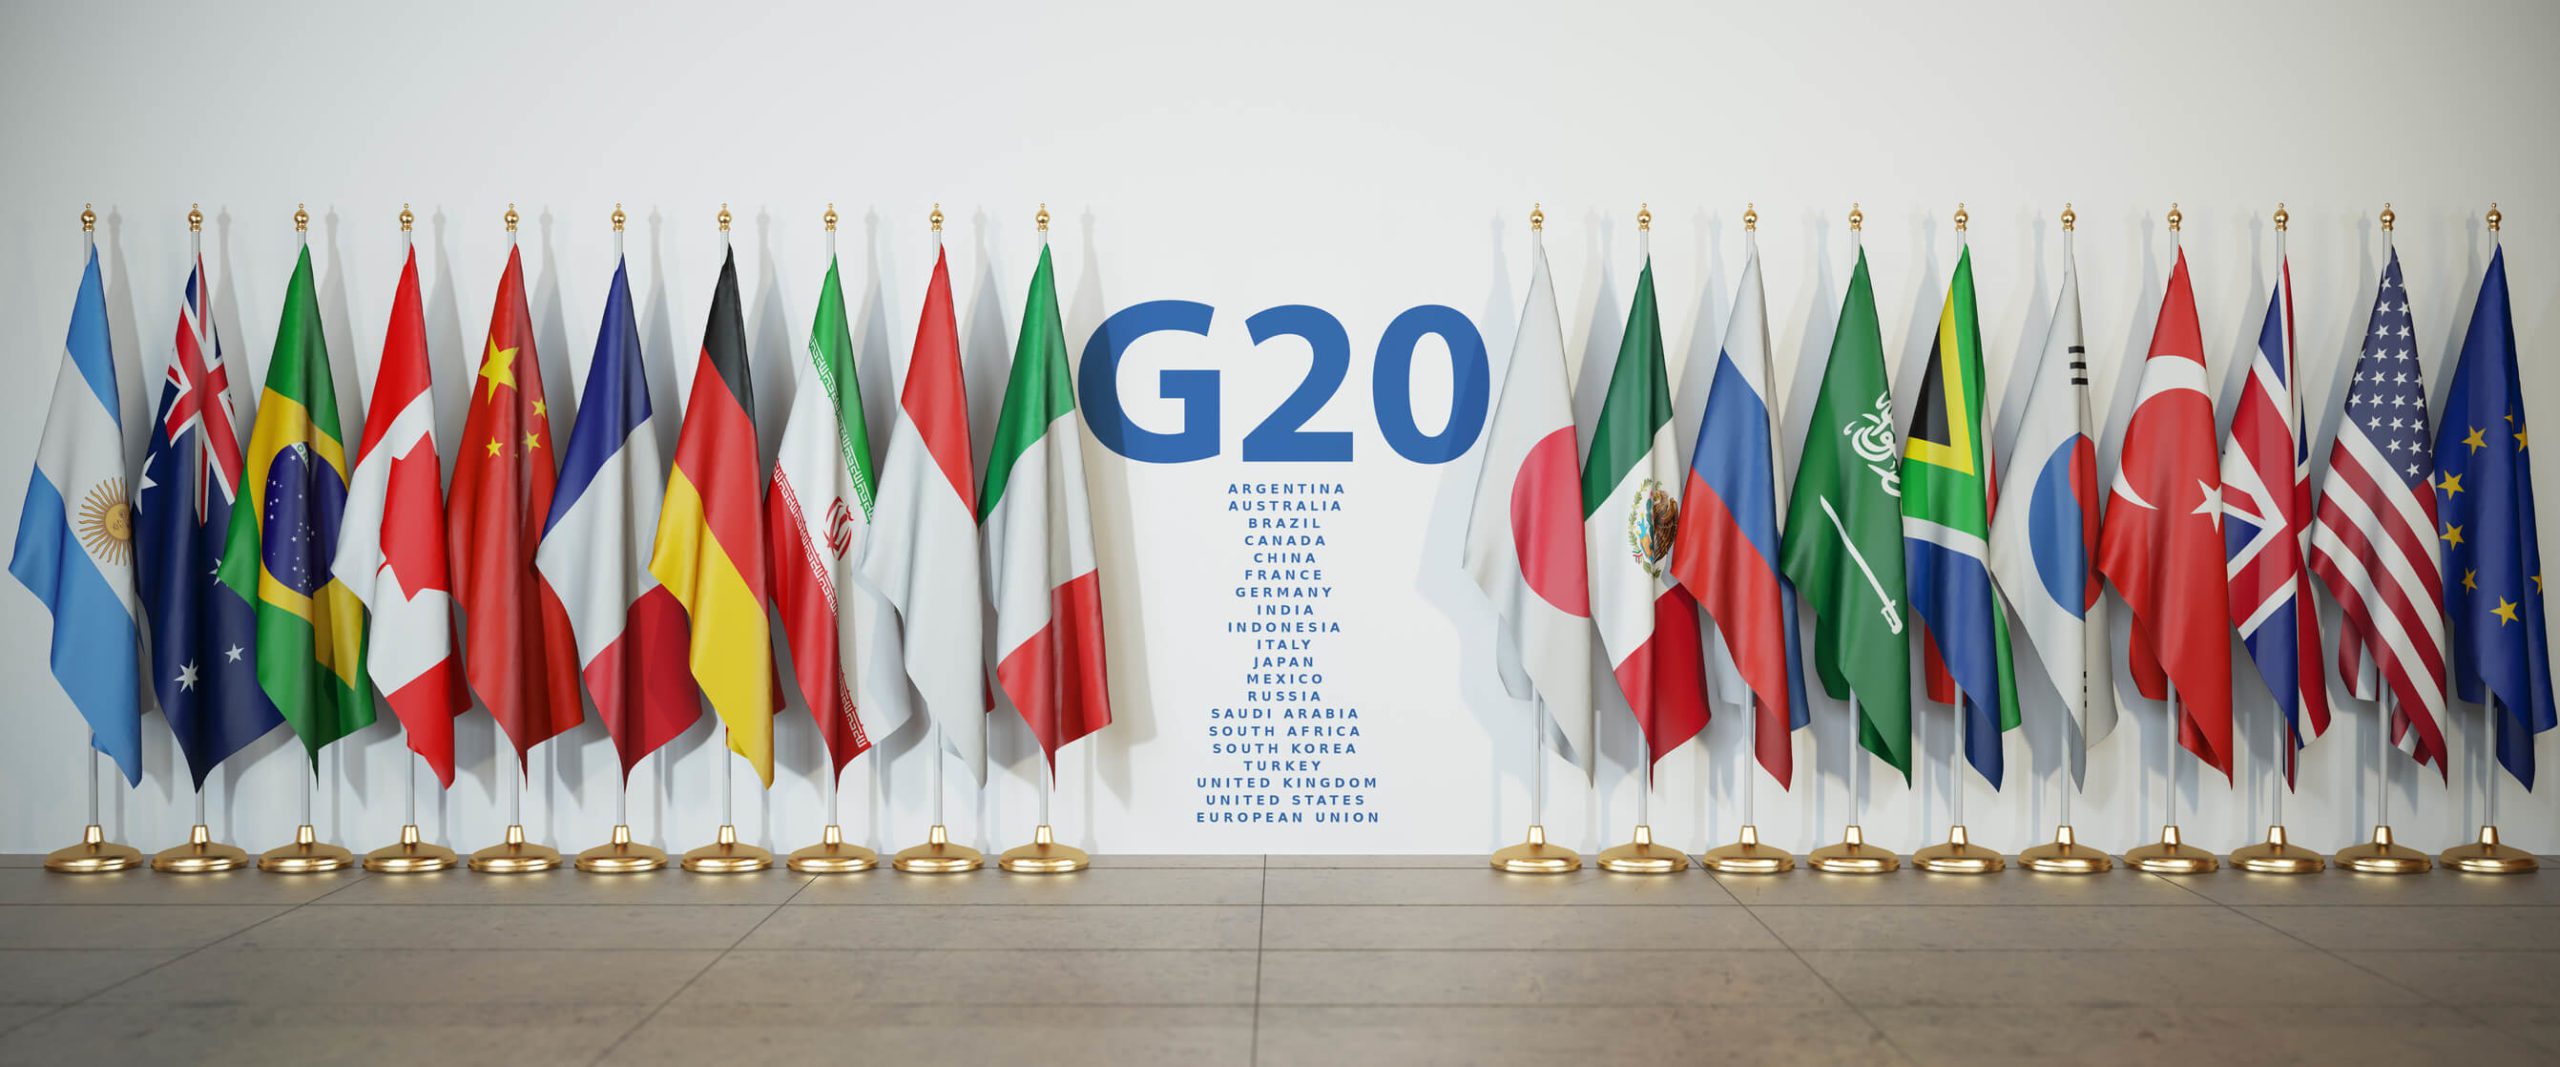 Bubbling up to the G20